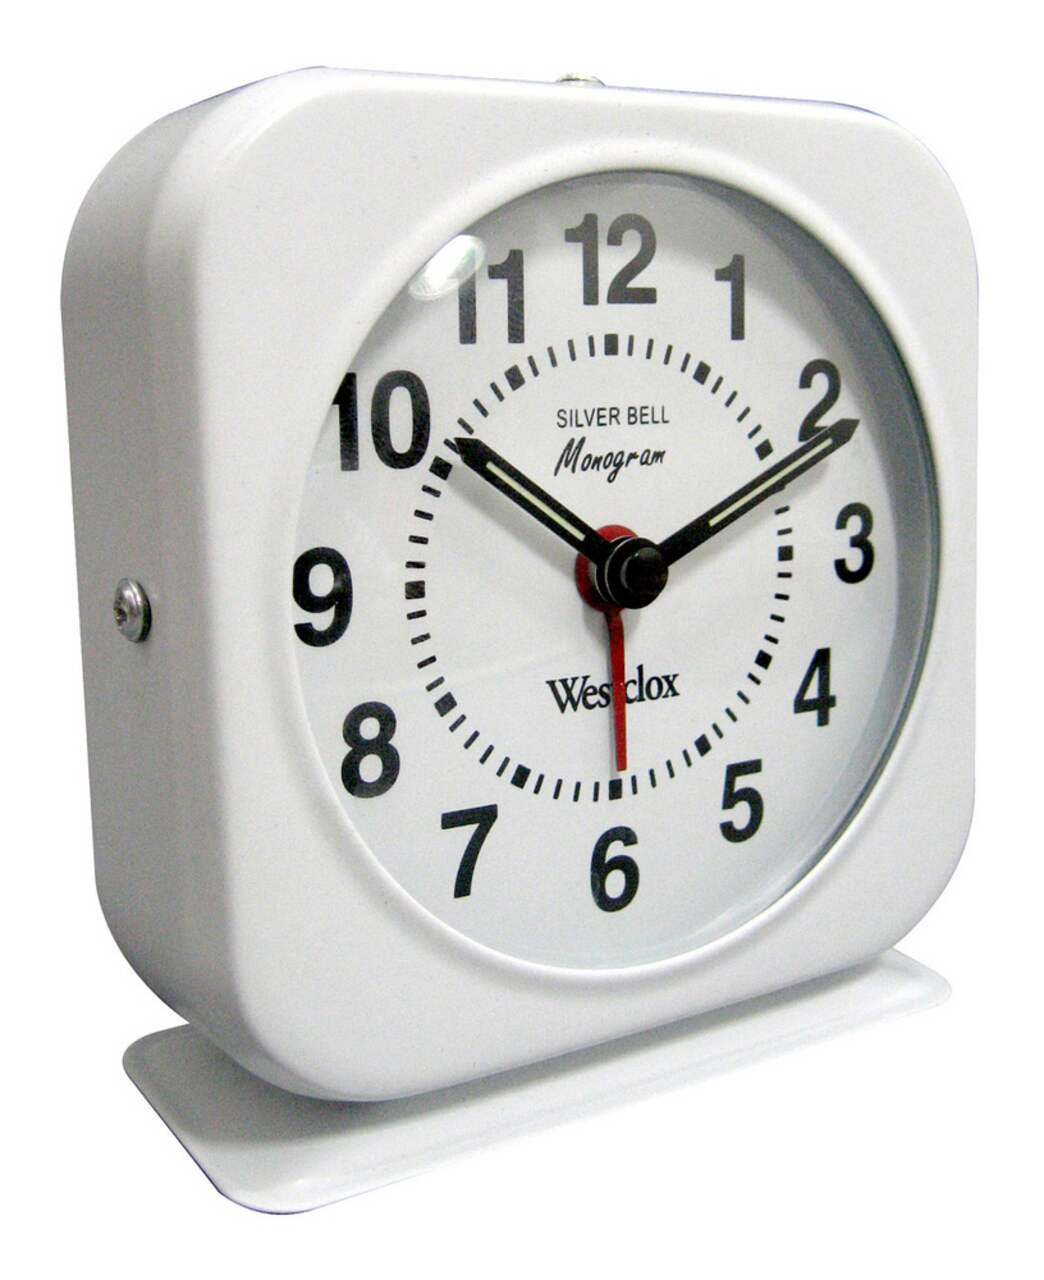 https://media-www.canadiantire.ca/product/living/electronics/home-communications/0441191/silver-rectangle-alarm-clock-e0b07225-d750-4dd6-b99a-5a6b029dc1b9.png?imdensity=1&imwidth=640&impolicy=mZoom